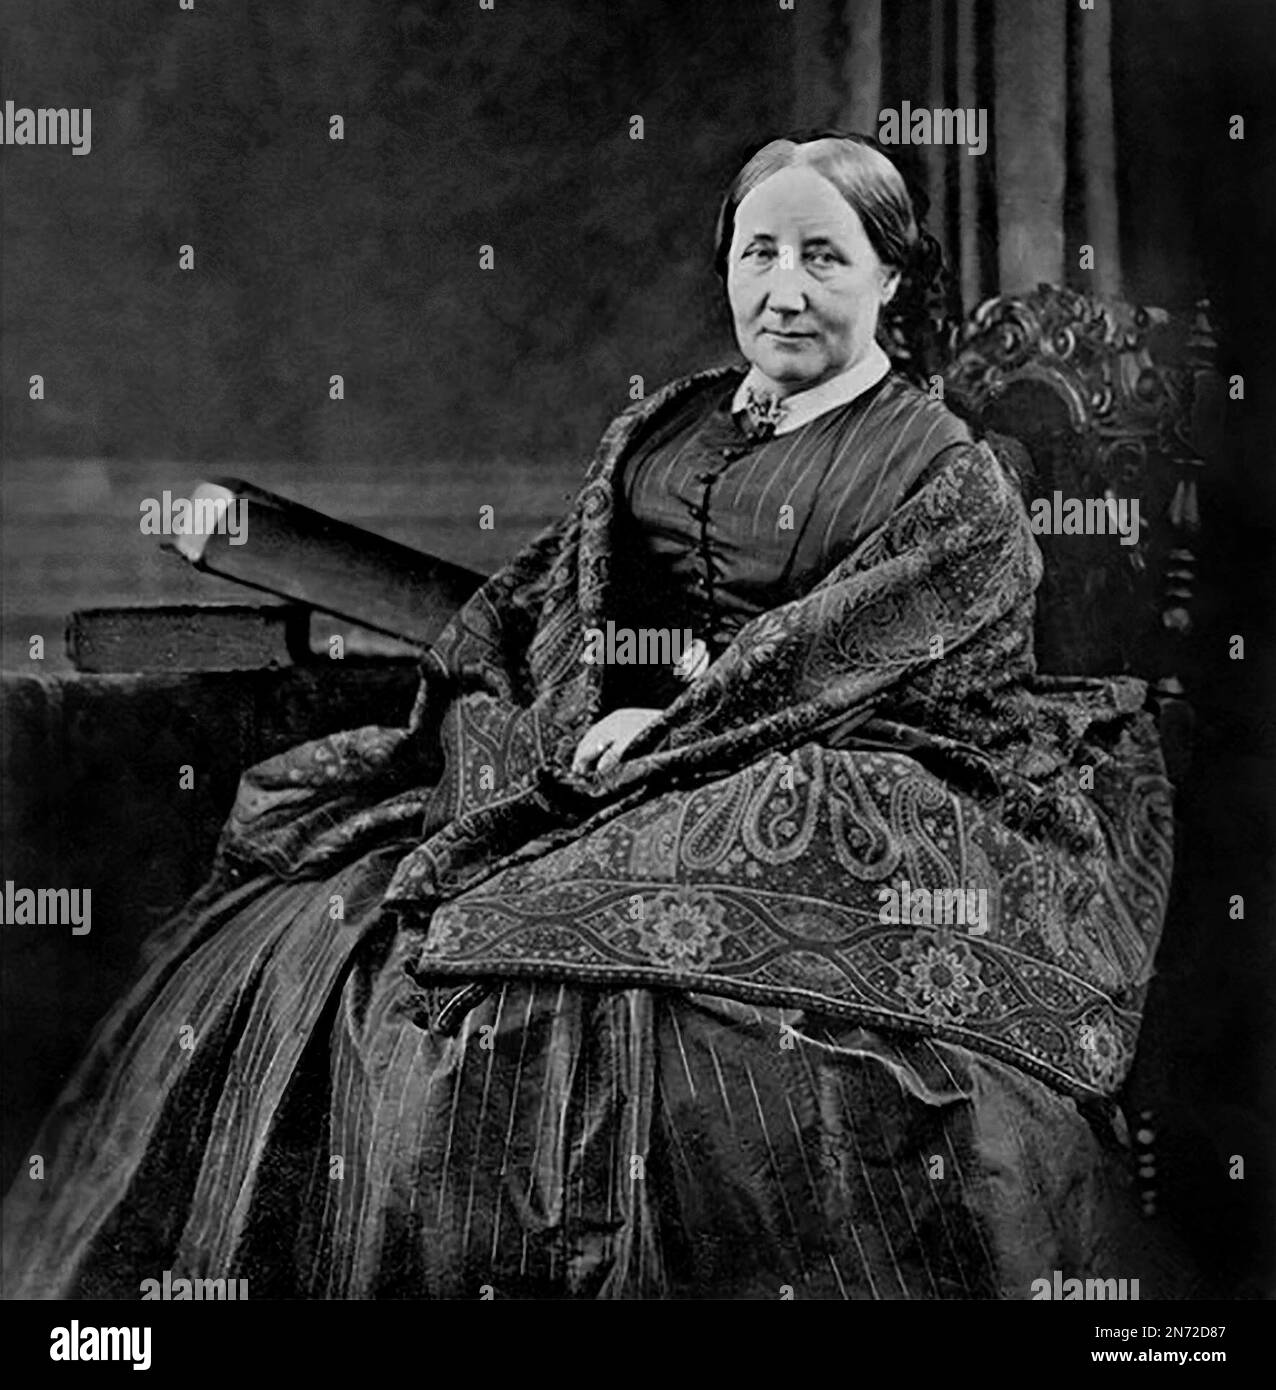 Elizabeth Cleghorn Gaskell, (née Stevenson; 1810-1865), c. 1860. Elizabeth Gaskell, often referred to as Mrs Gaskell, was an English novelist and short story writer during the Victorian era. Stock Photo